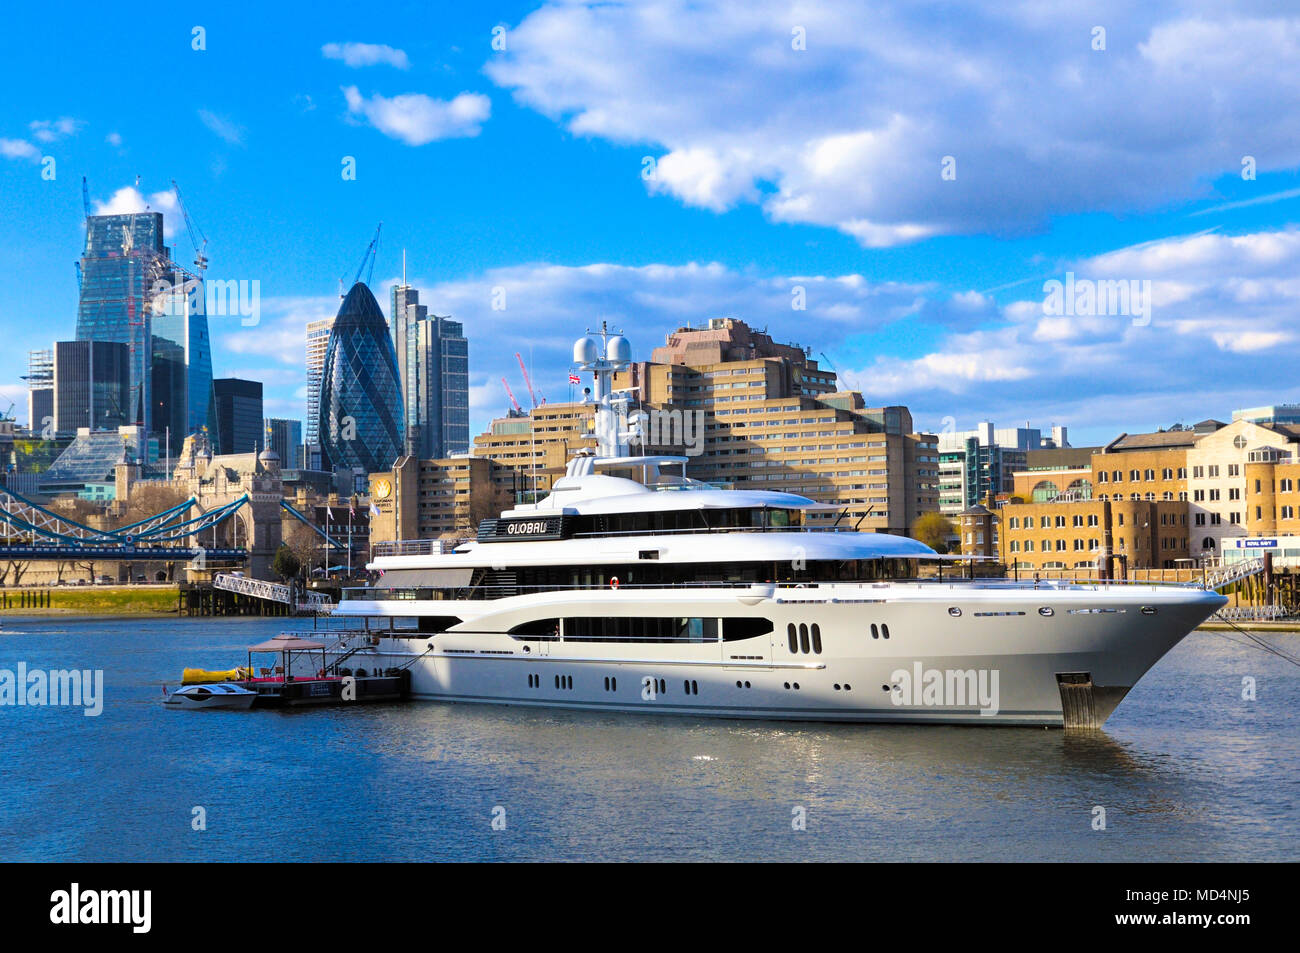 Superyacht 'Global' moored on the River Thames, London, England, UK Stock Photo